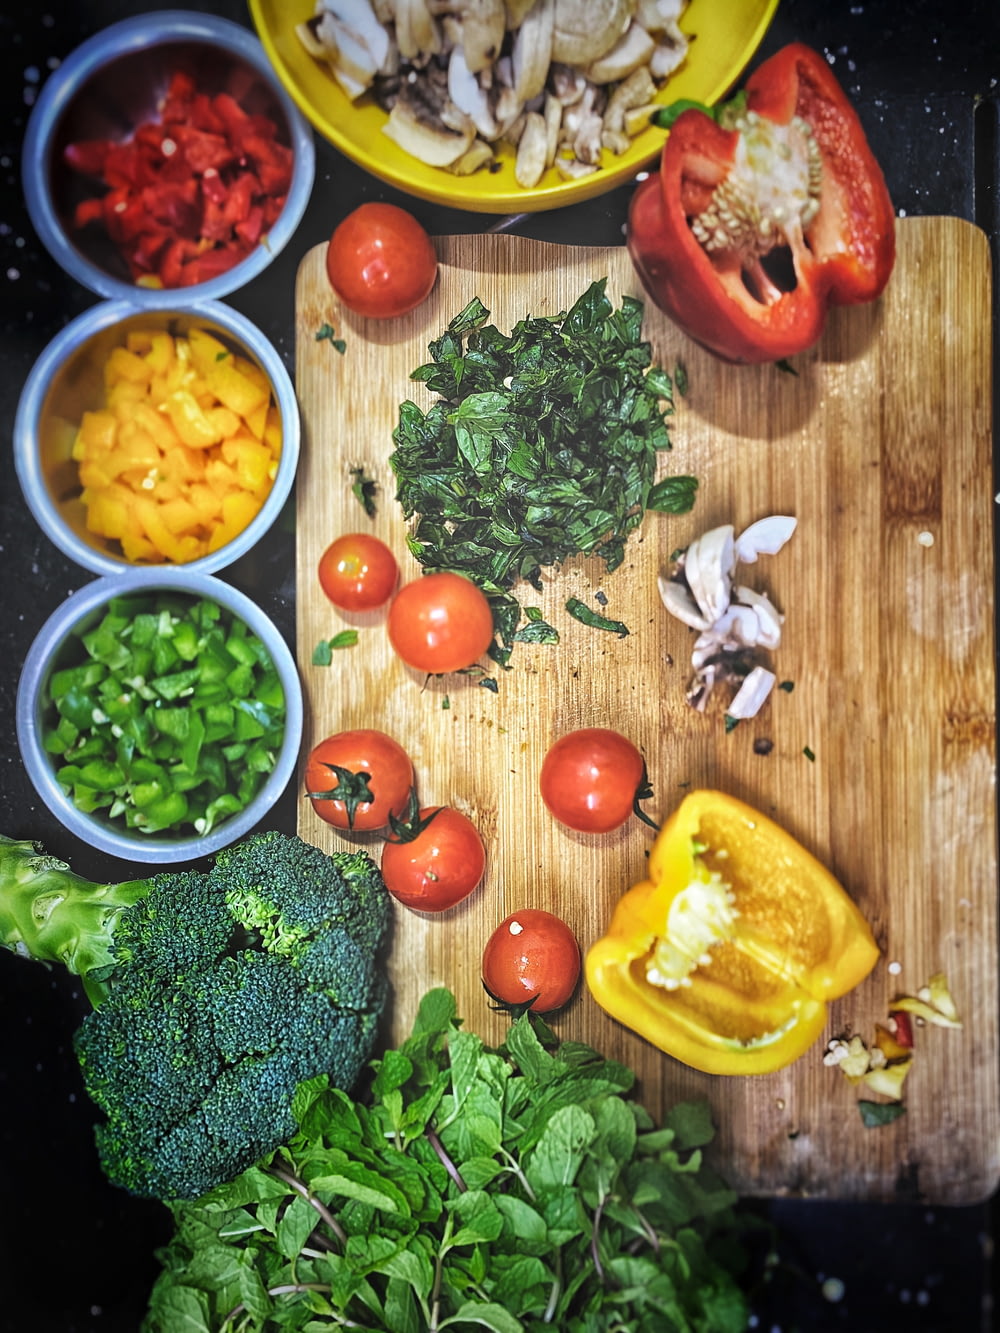 orange tomatoes near sliced yellow bell pepper, broccoli on wooden chopping board